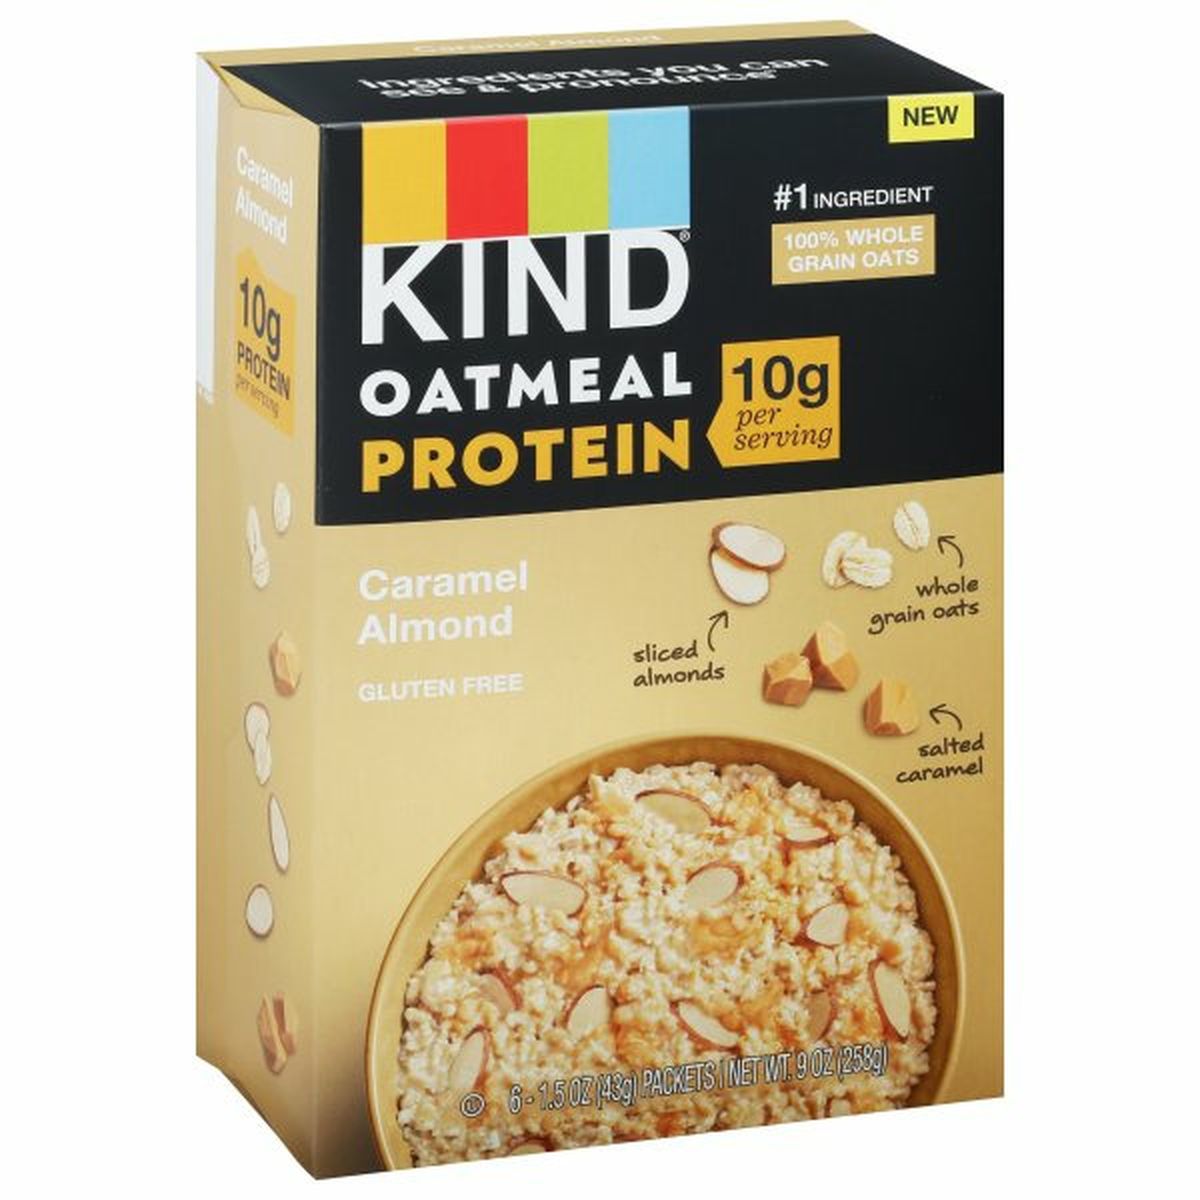 Calories in KIND Oatmeal, Caramel Almond, Protein